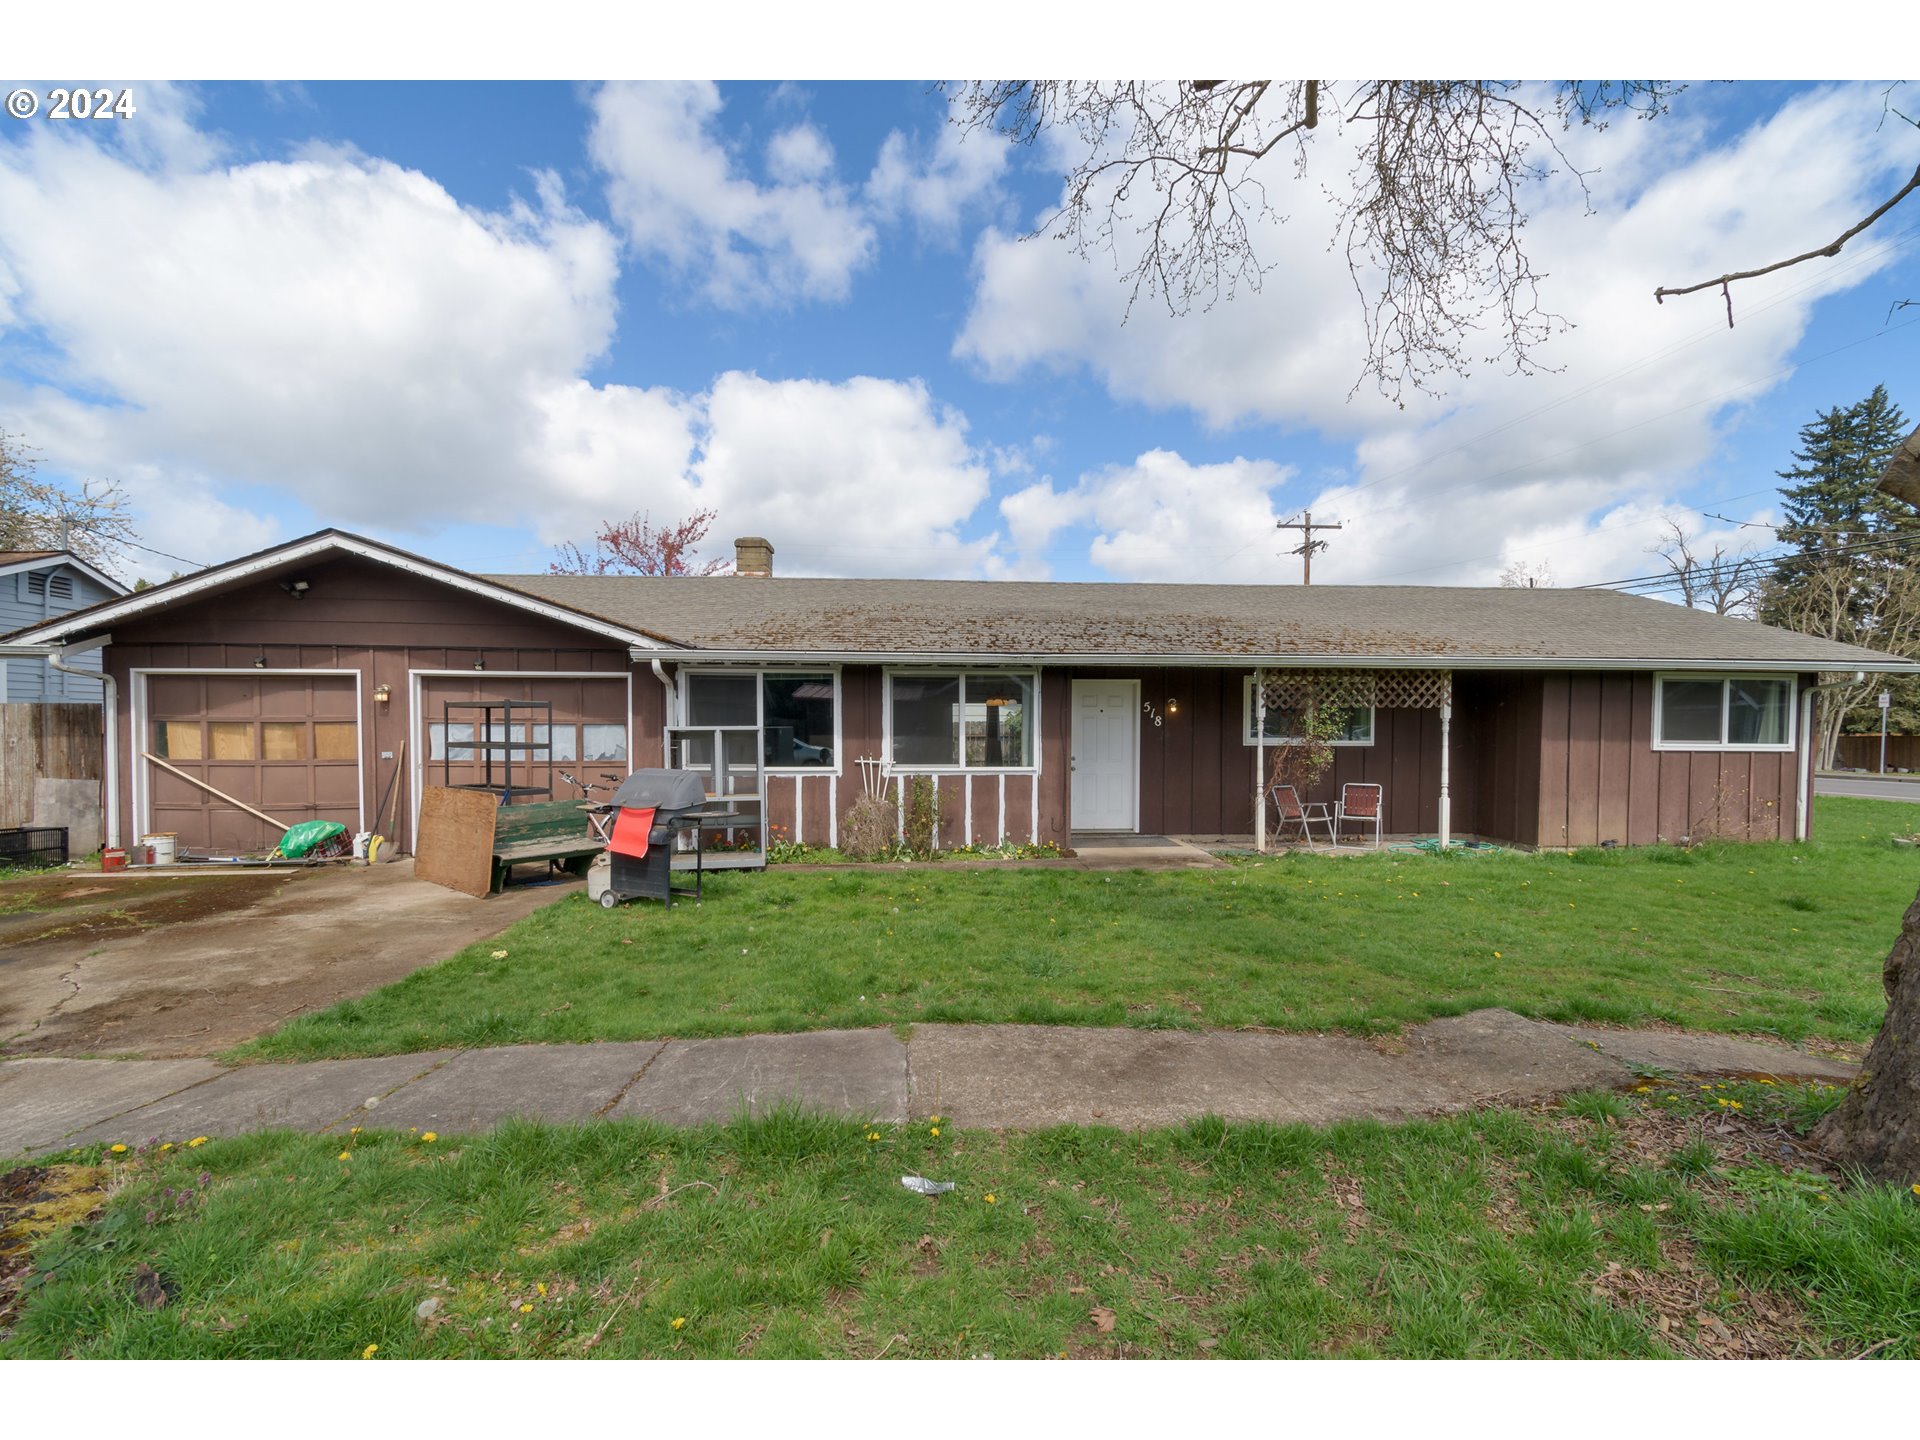 518 Scarbrough AVE, Creswell, OR 97426